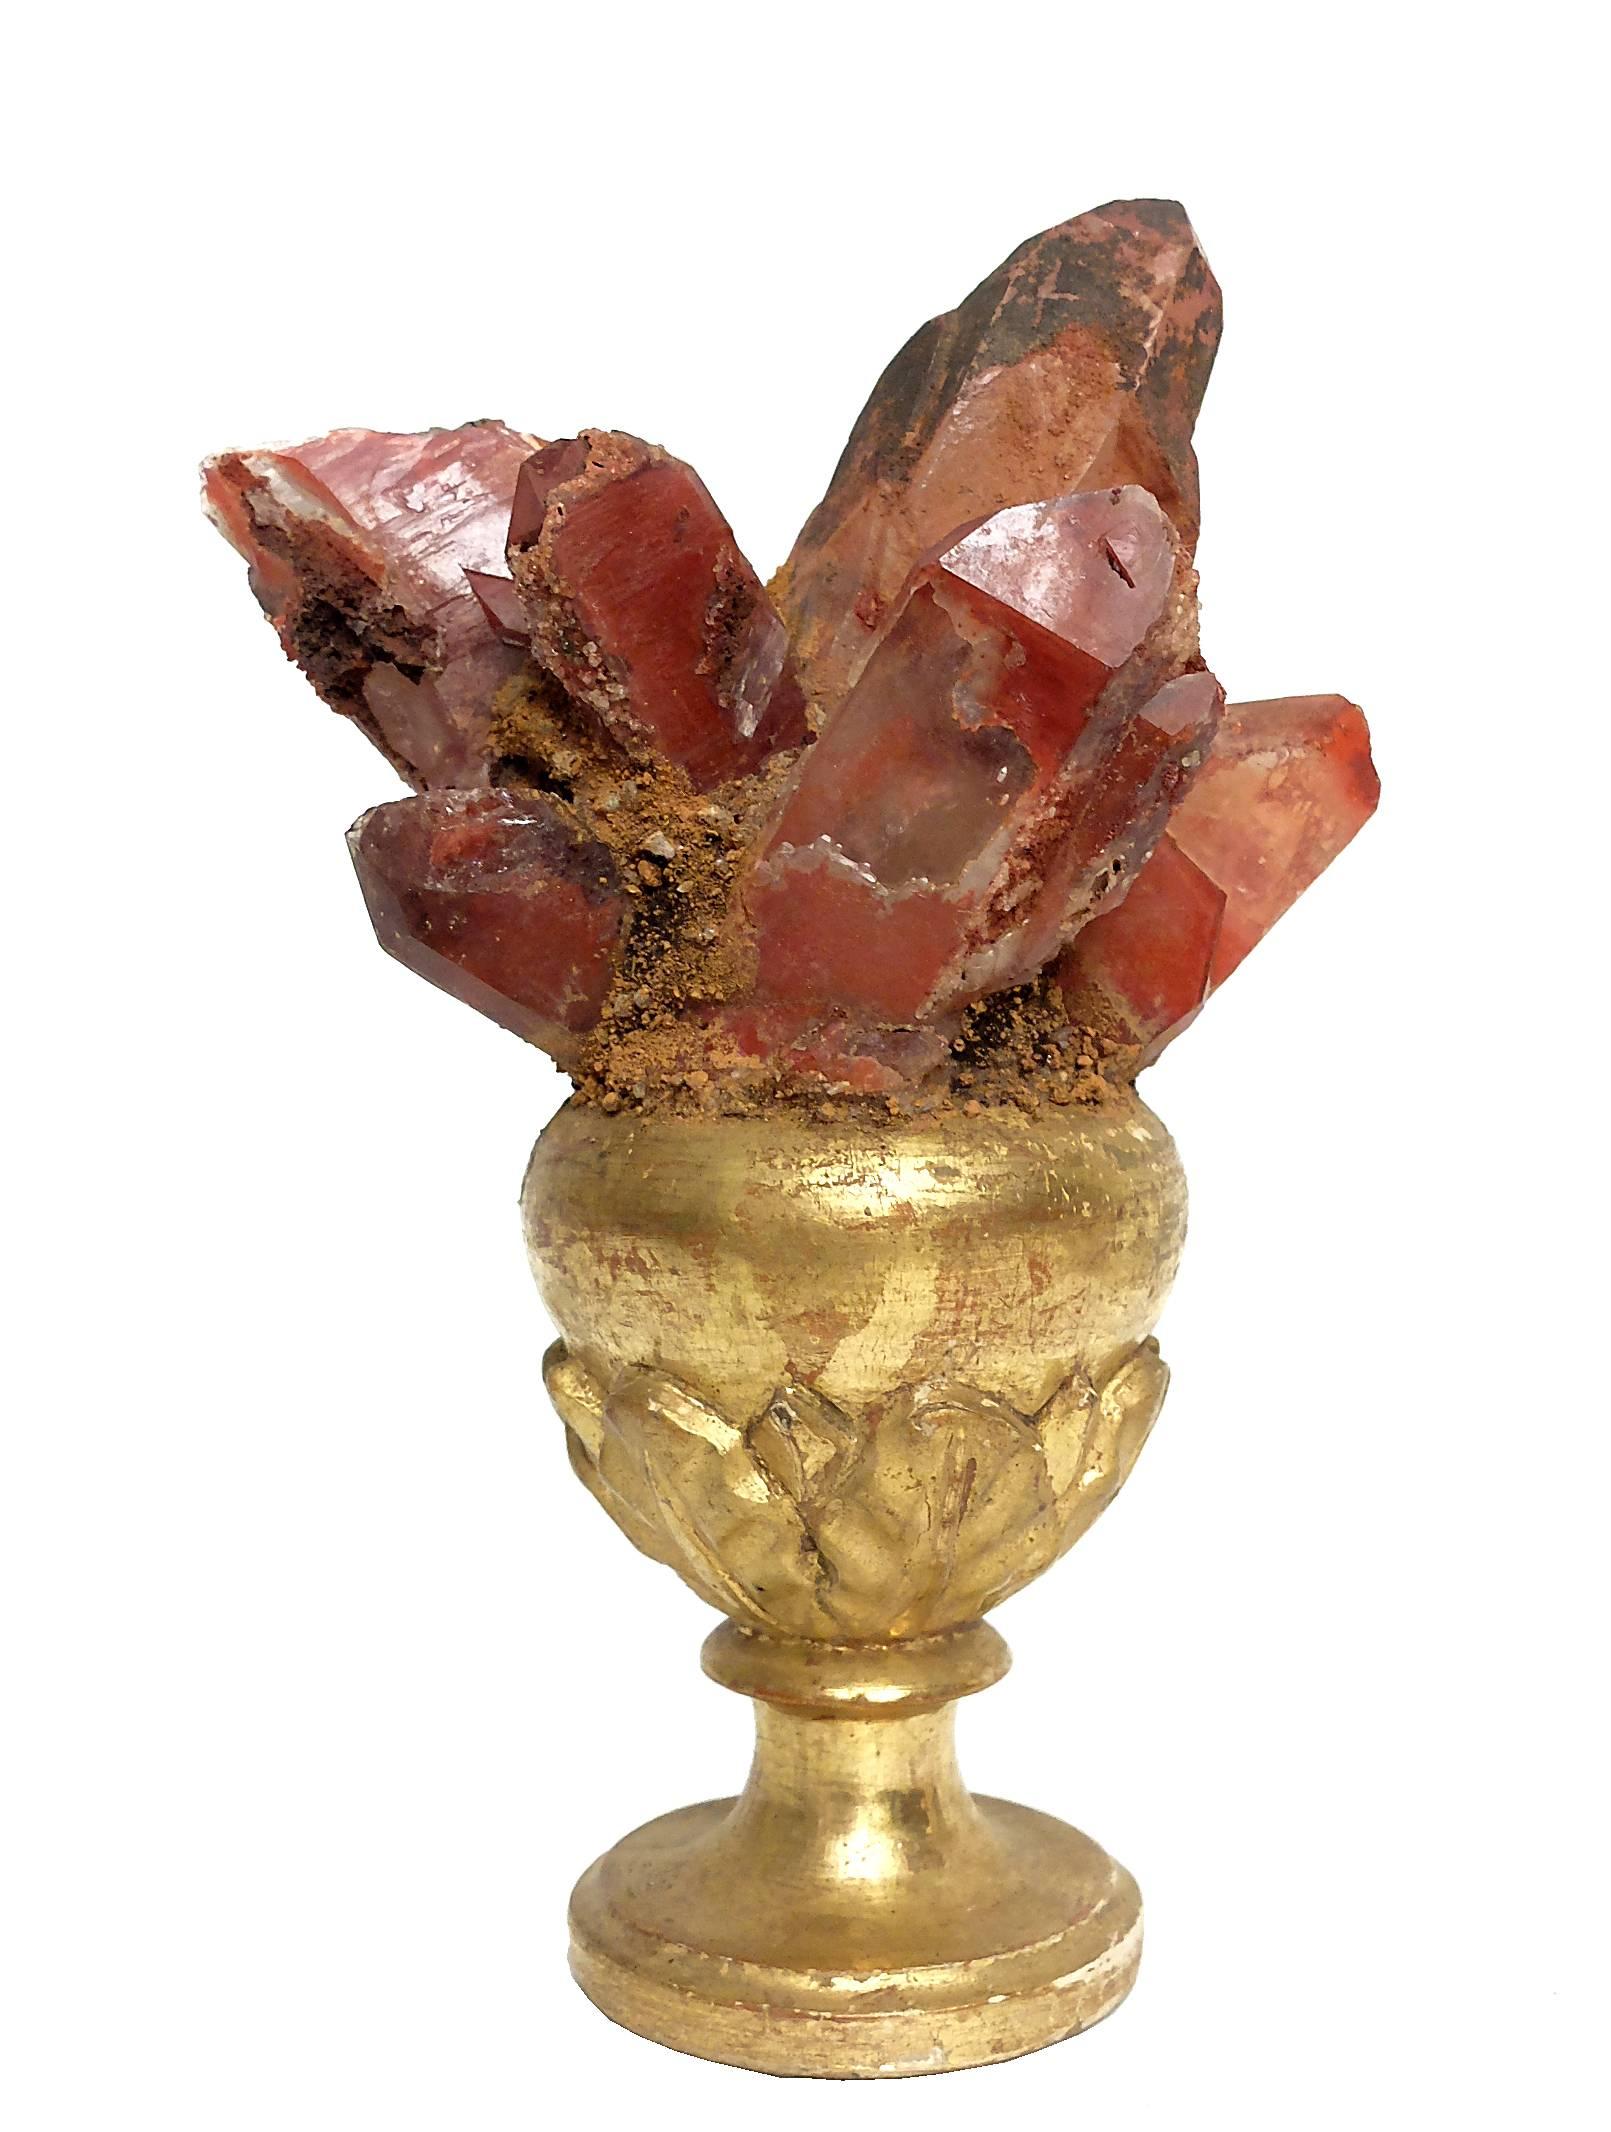 A Naturalia mineral specimen a pair of red crystals, mounted over older guild-plated wooden bases on a vase shape with leaves.